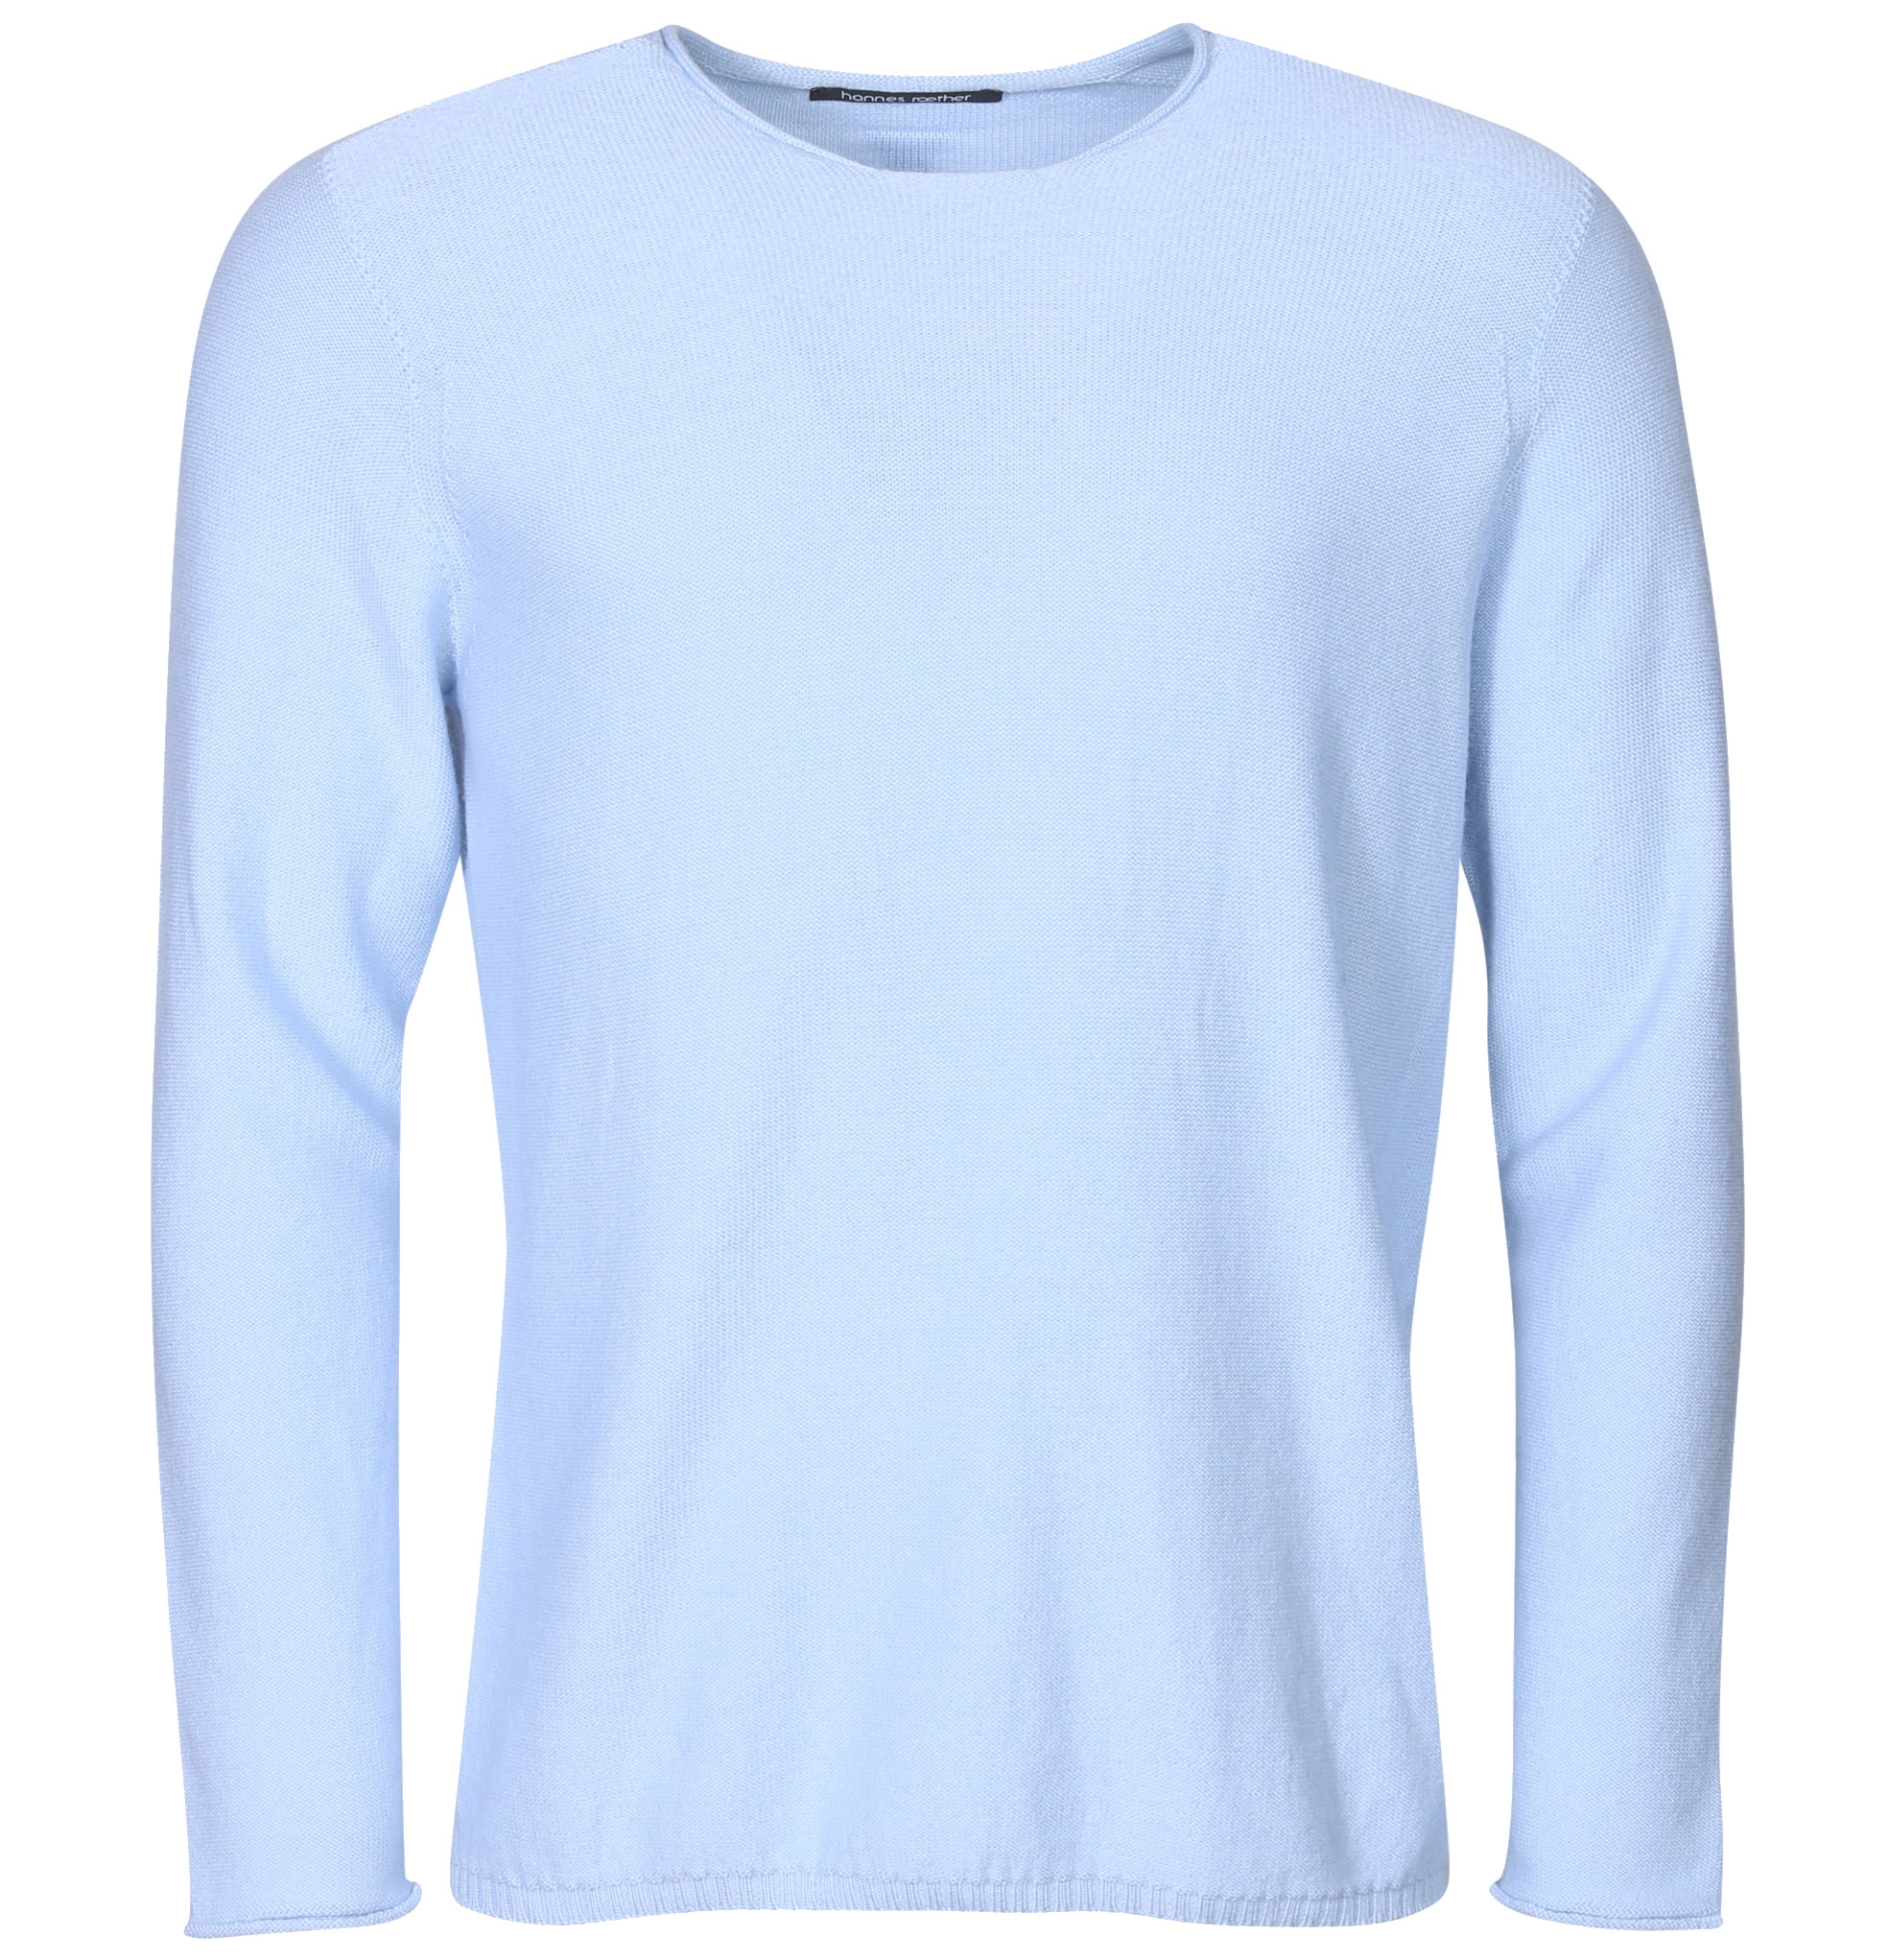 HANNES ROETHER Merino Knit Pullover in Light Blue